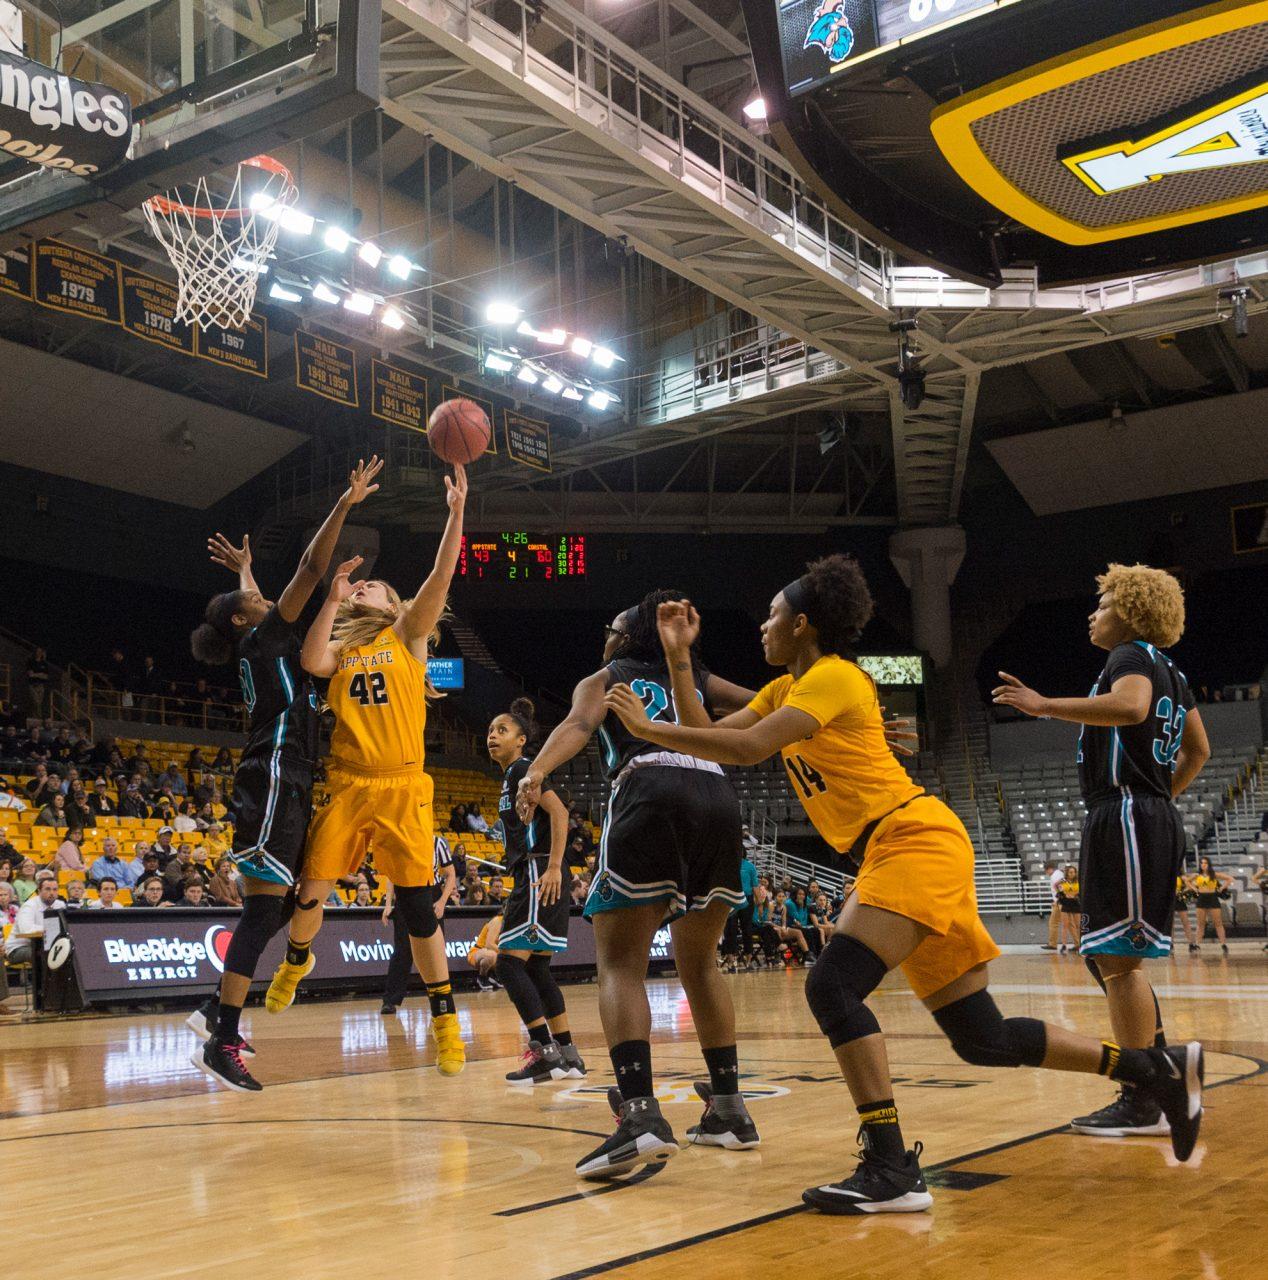 Sophomore center Bayley Plummer shoots and scores two points while teammate Armani Hampton tries to get in position to catch the rebound during the game vs. Coastal Carolina on Saturday, March 3rd. 